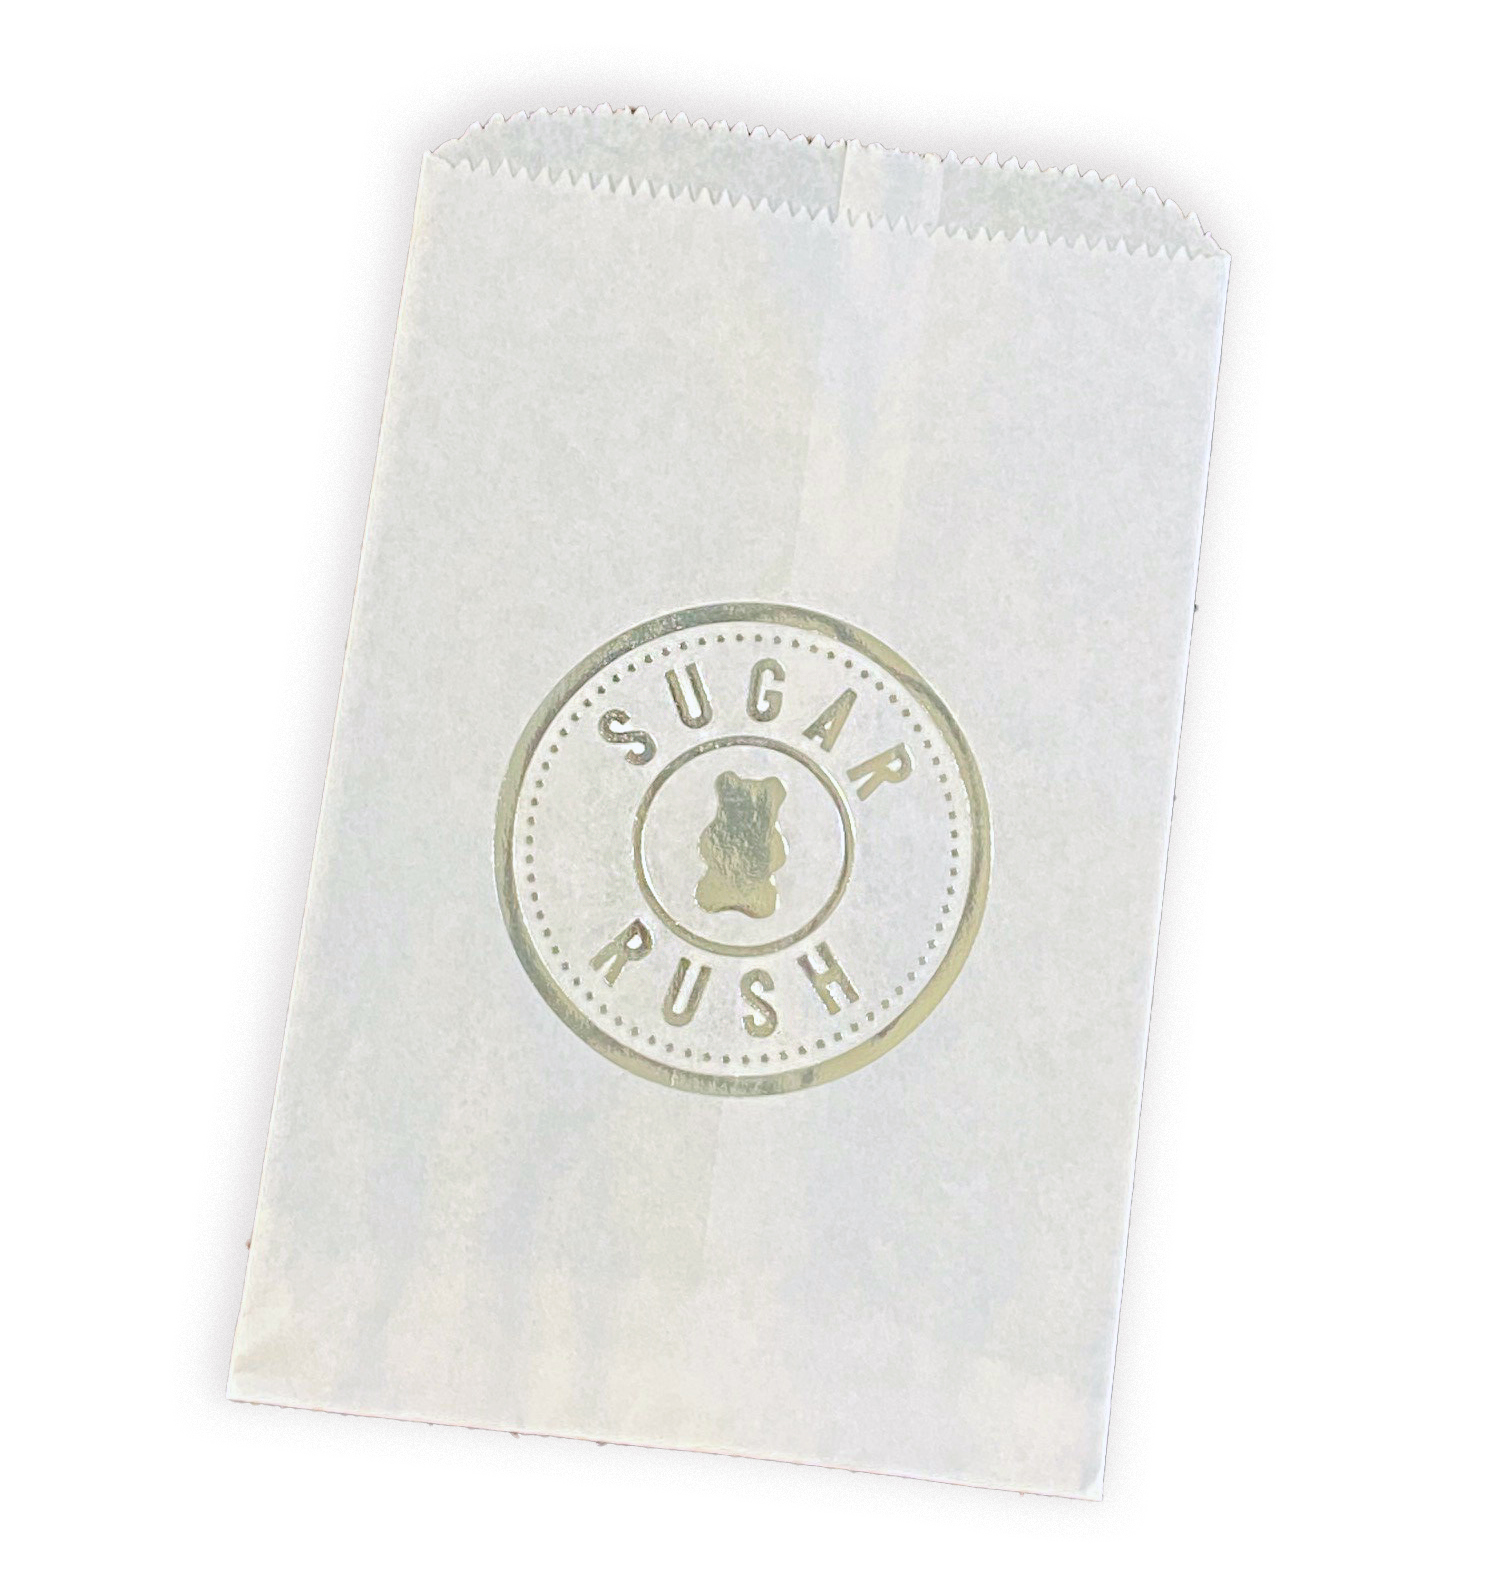 Hot stamped glassine lined gourmet bags